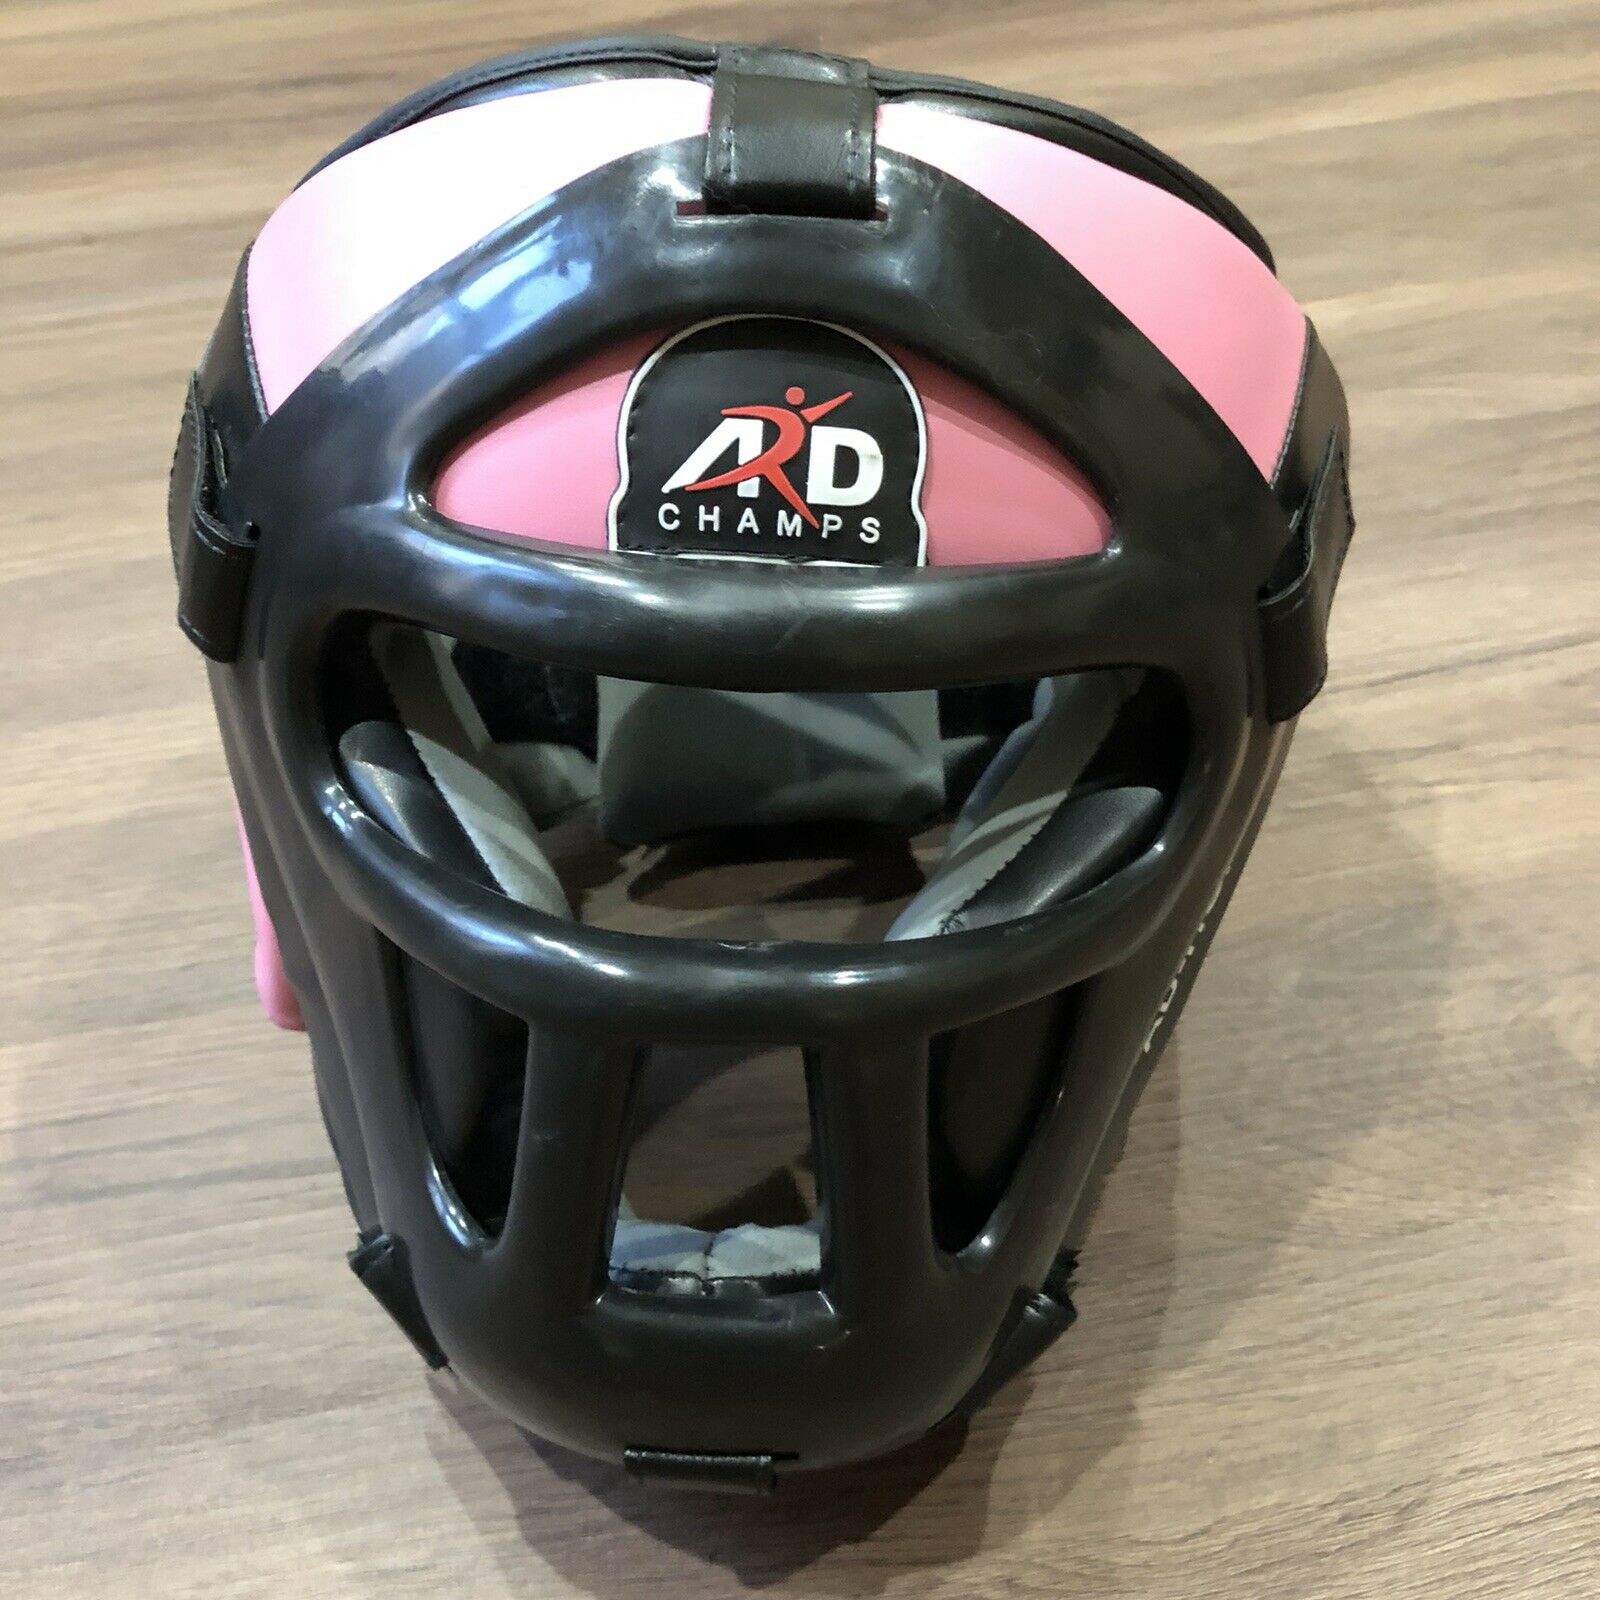 Agp Champs Mma Martial Arts Sparring Boxing Headgear & Facemask Ad-hgp-39 Pink M